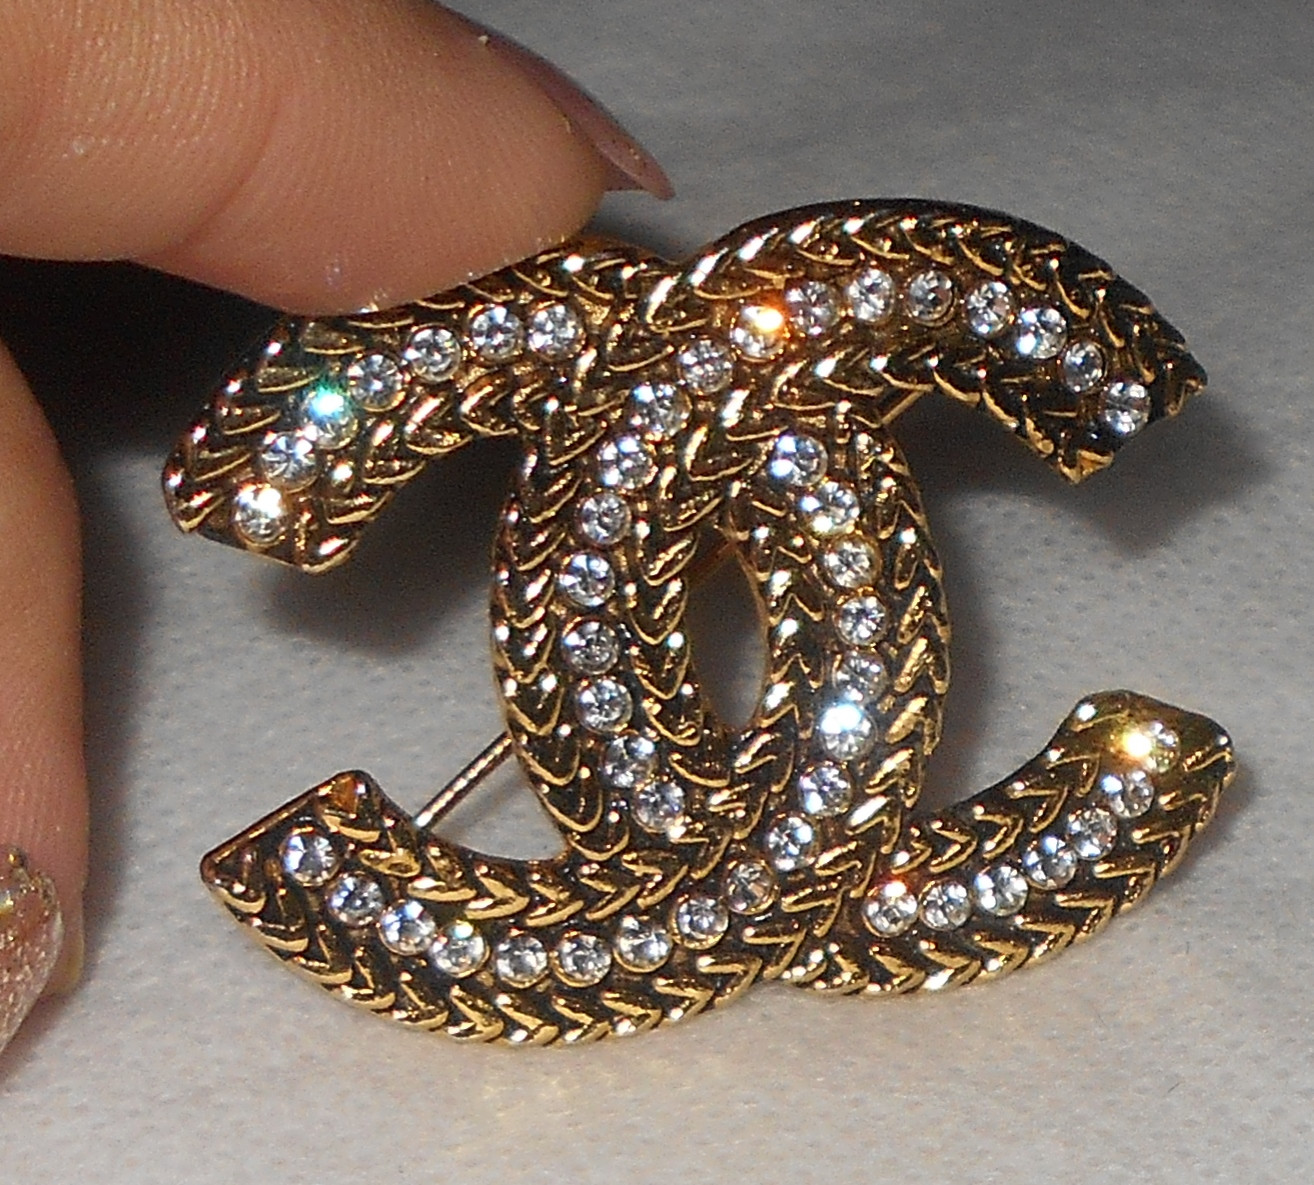 Chanel Brooches
 Please help me is this coco chanel brooch authent